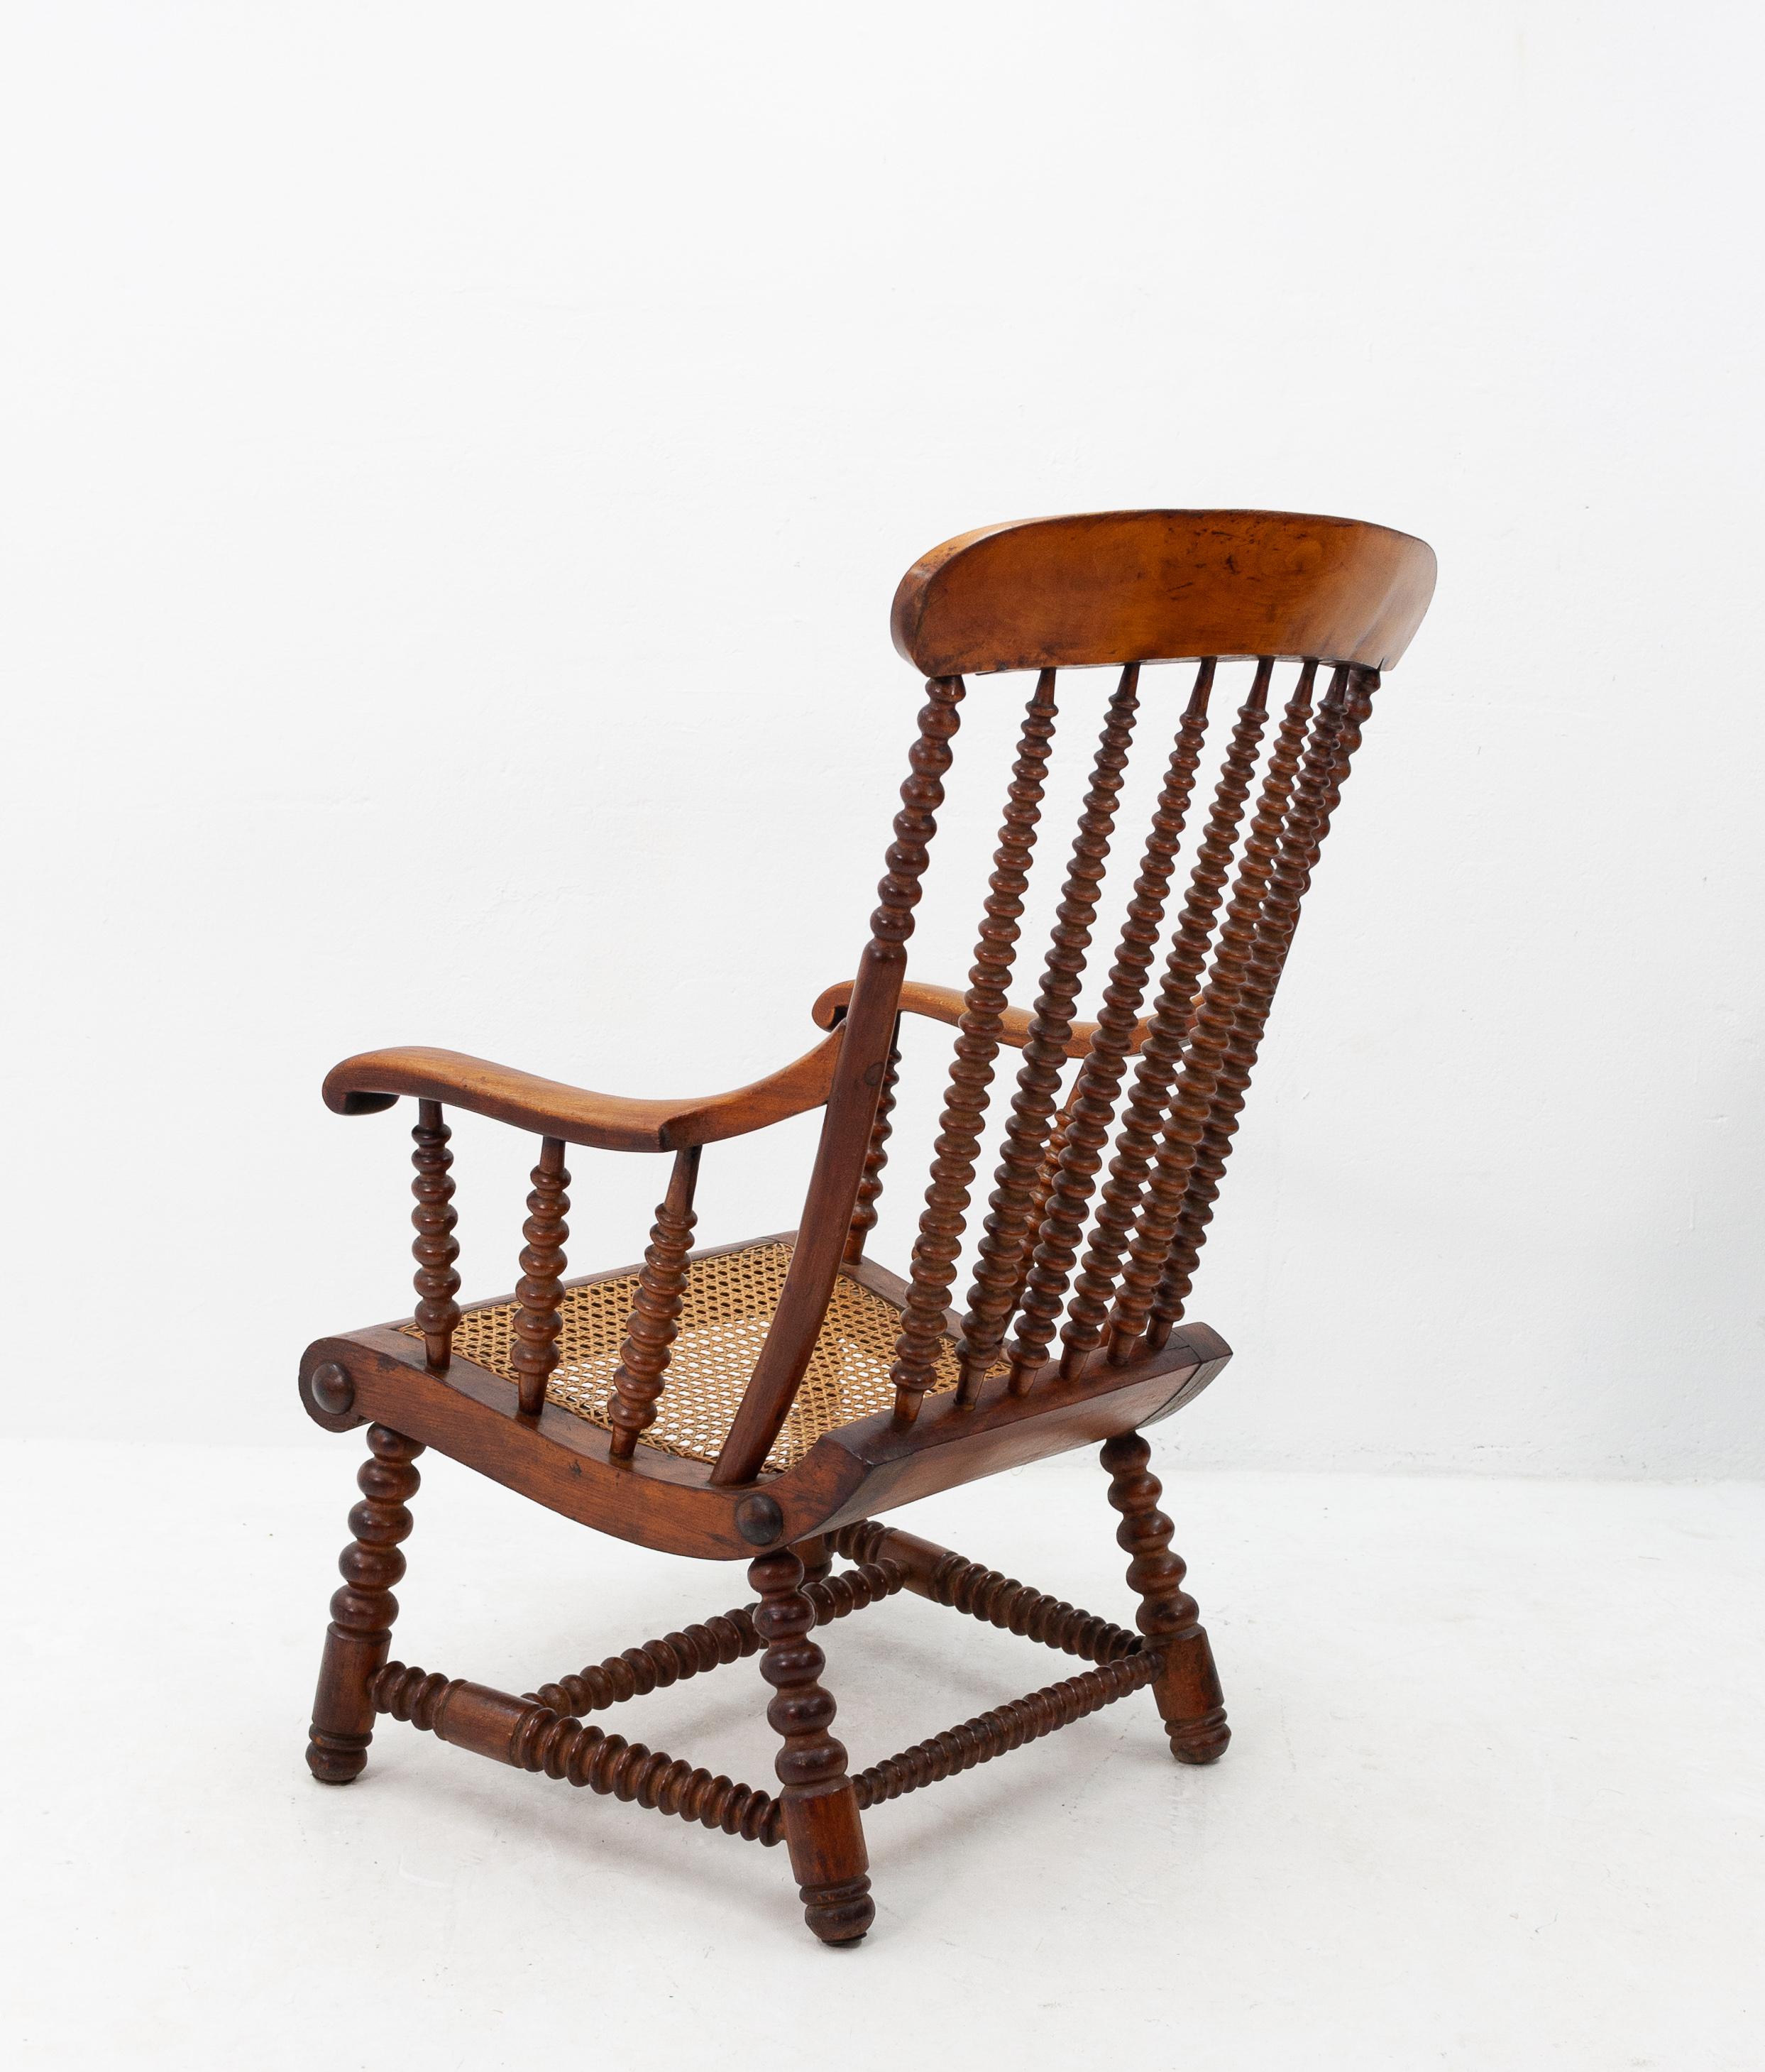 19th century English bobbin chair. Beautiful color, very good condition with just the right amount of wear. New rattan seat. Cherrywood frame. Very nice and decorative piece.



 